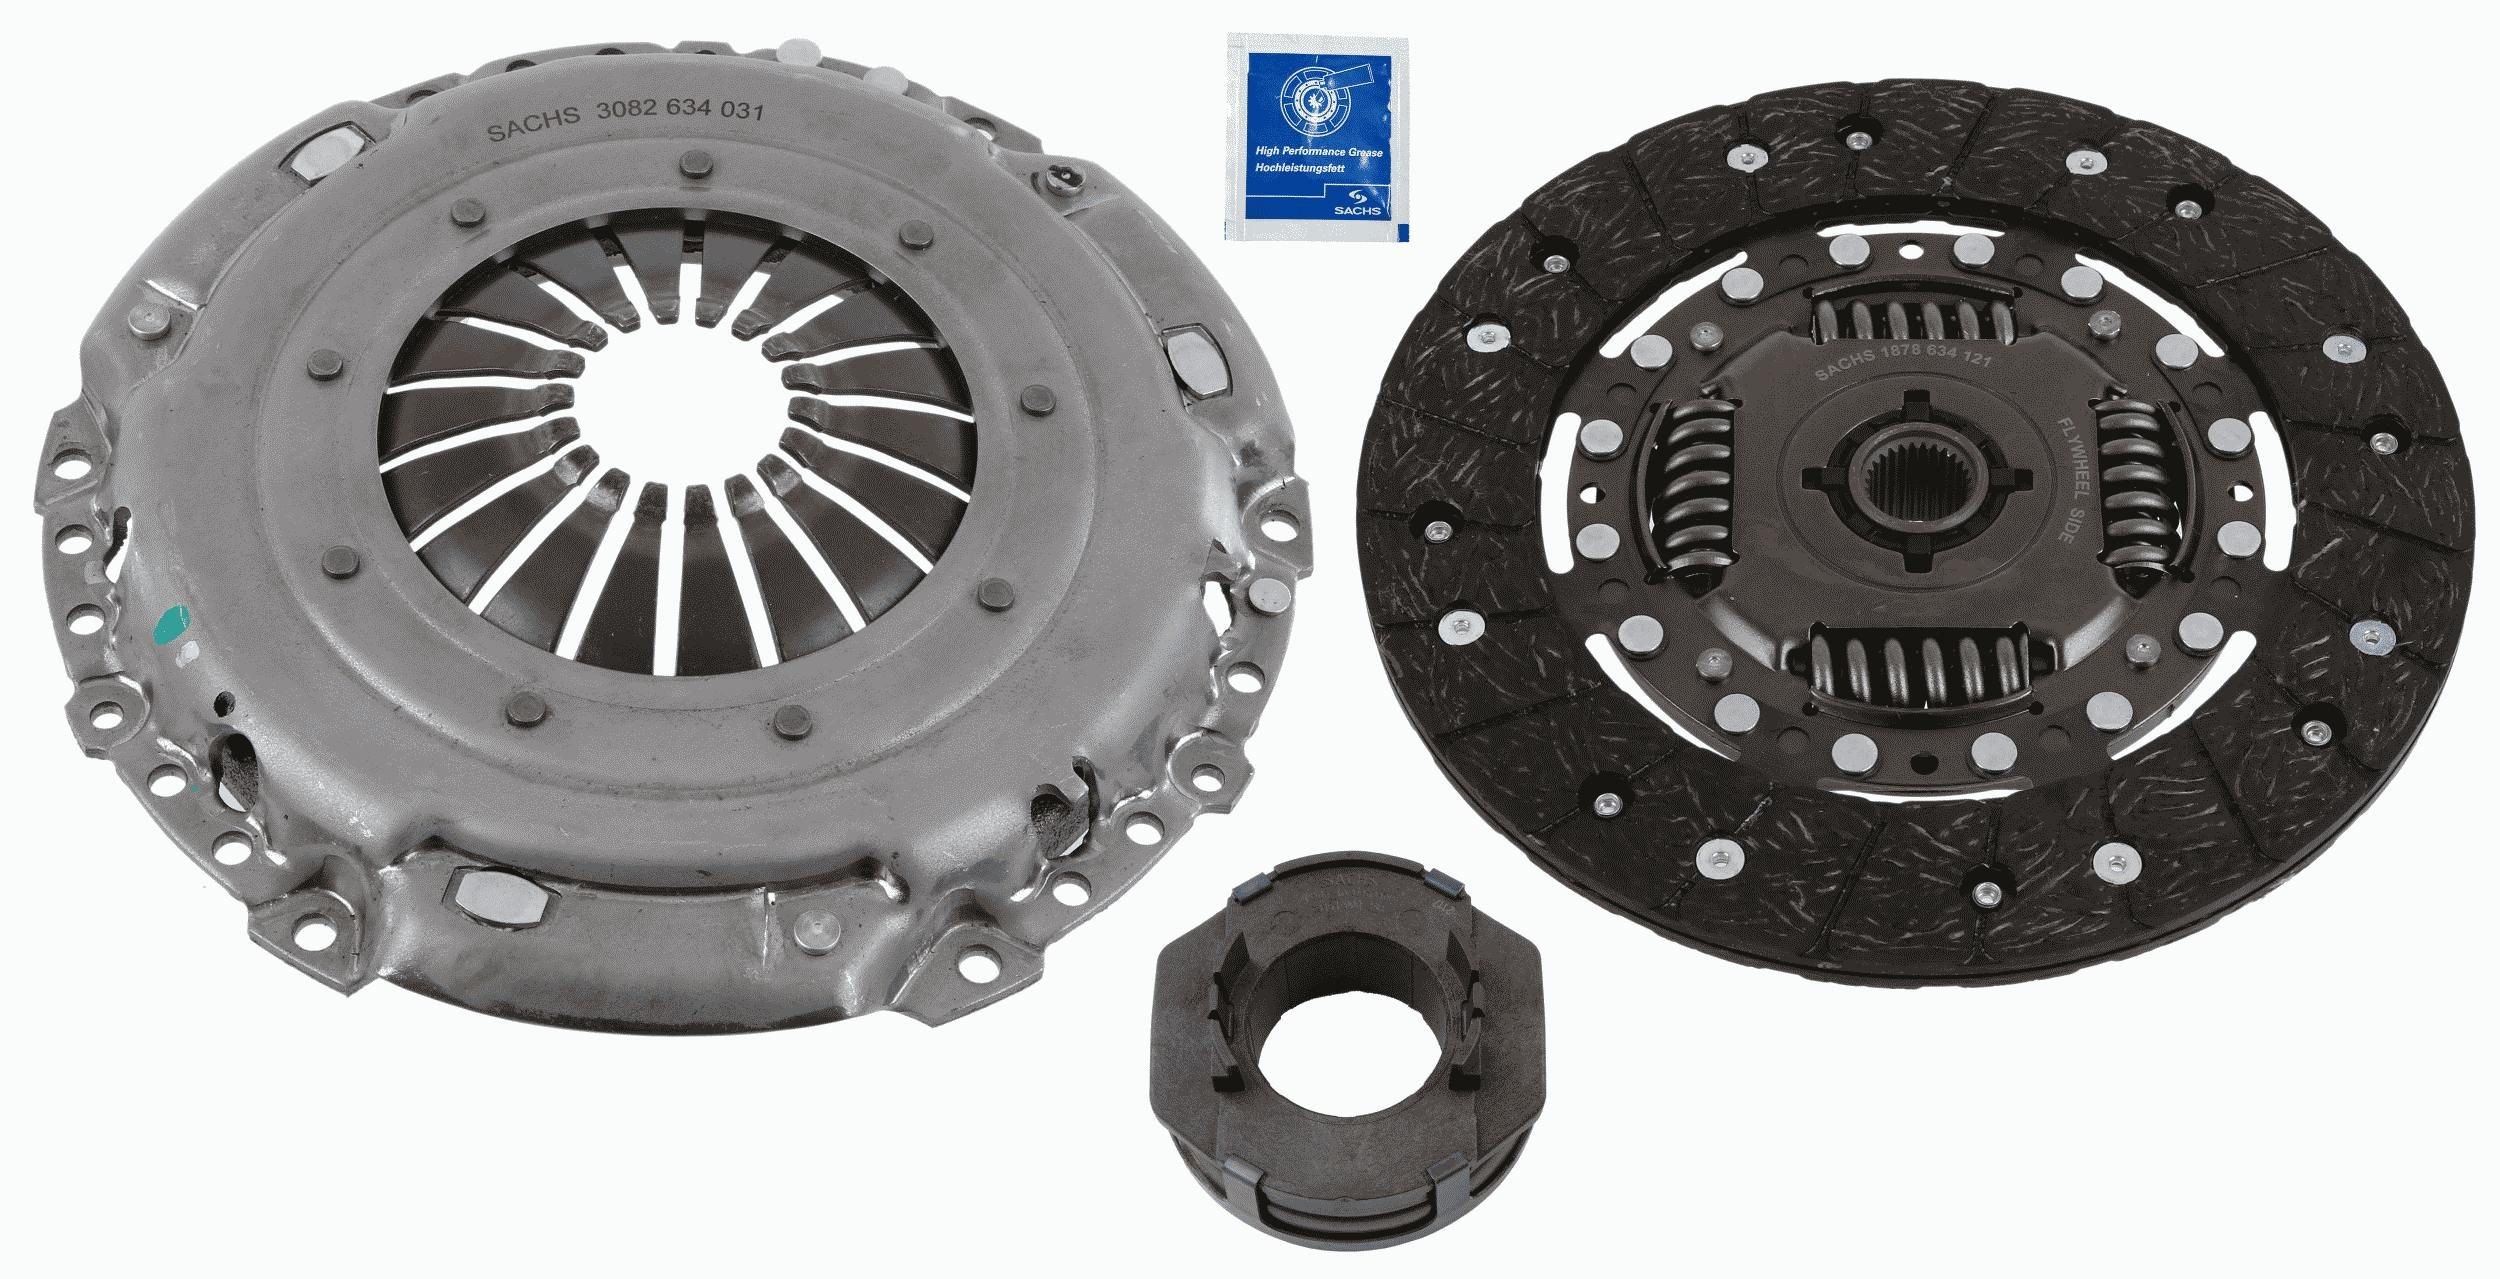 OEM-quality SACHS 3000 951 605 Clutch replacement kit